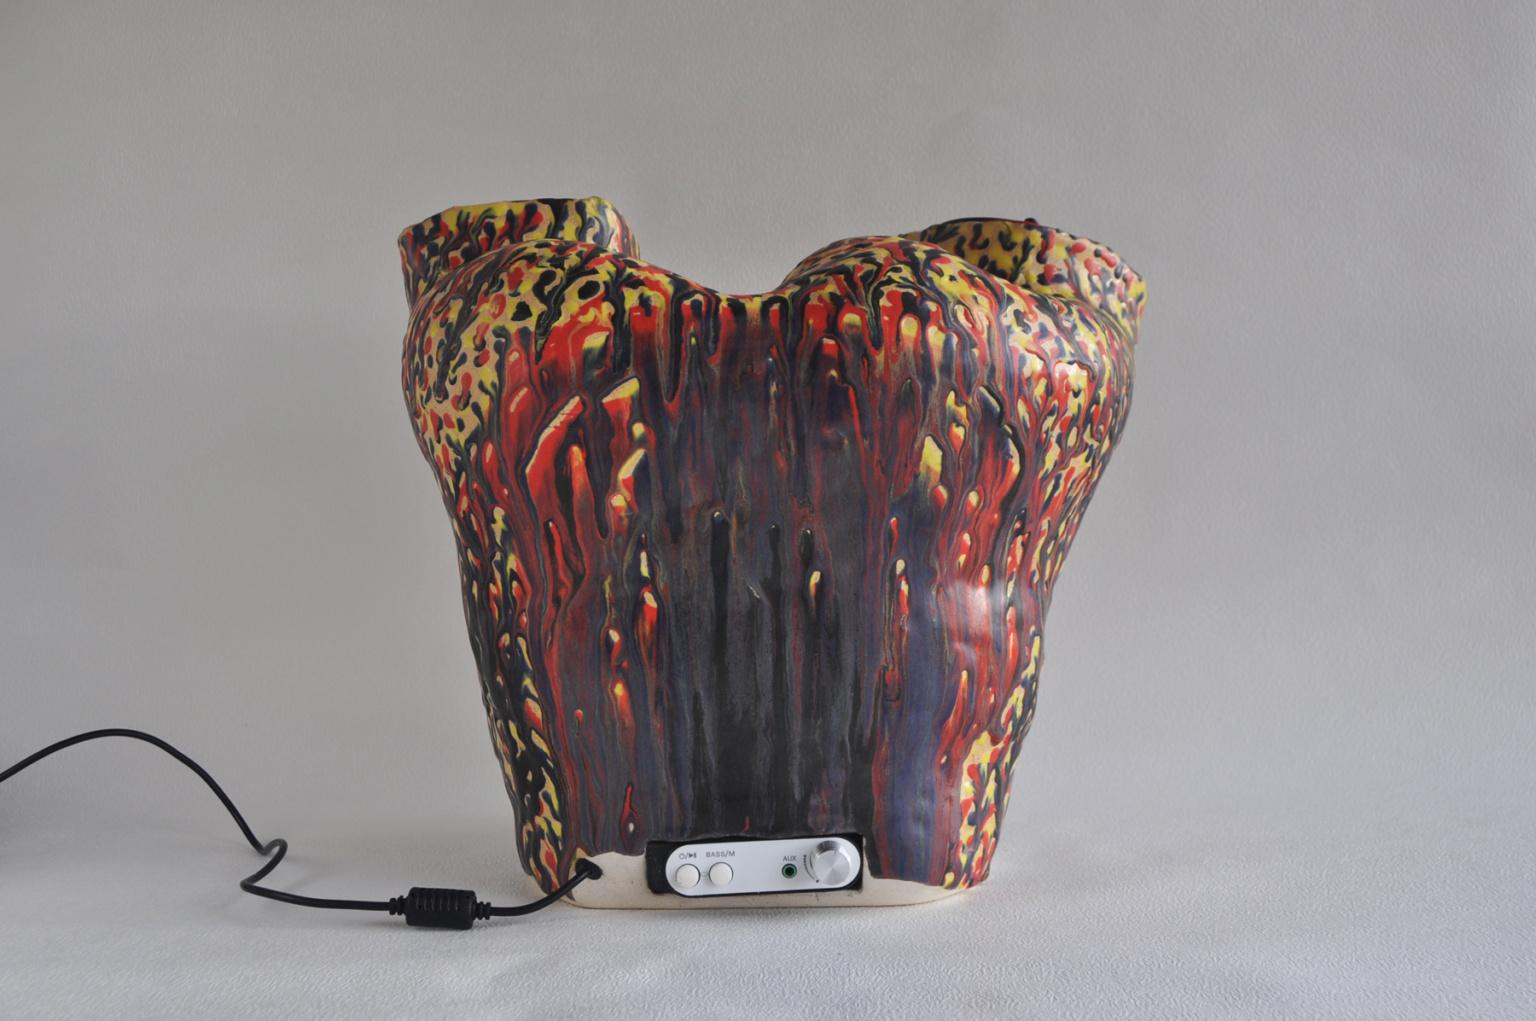 A working ceramic speaker (bluetooth/cord) by Japanese artist Hiroyuki Yamada.

Hiroyuki Yamada (b 1970, Hyogo Pref., Japan). Yamada has been actively exhibiting his works since the early 1990s, gaining significant attention both in Japan and